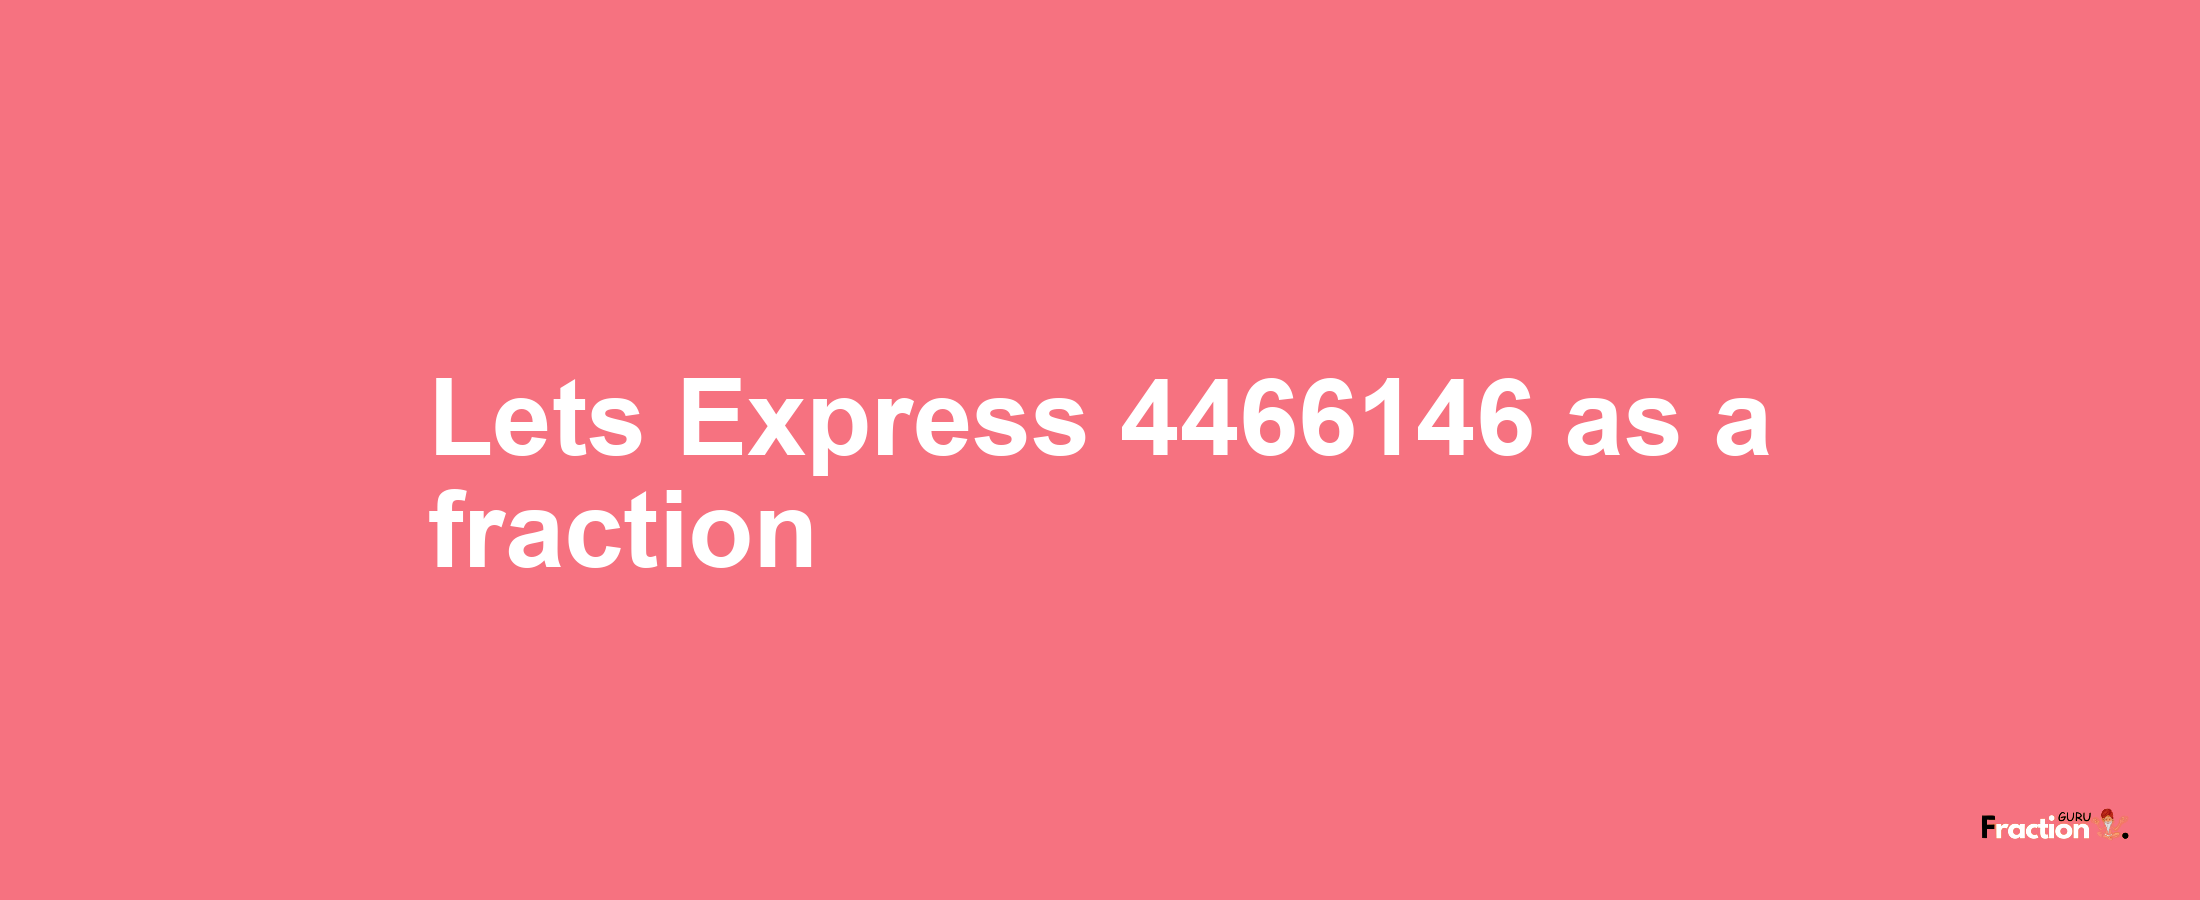 Lets Express 4466146 as afraction